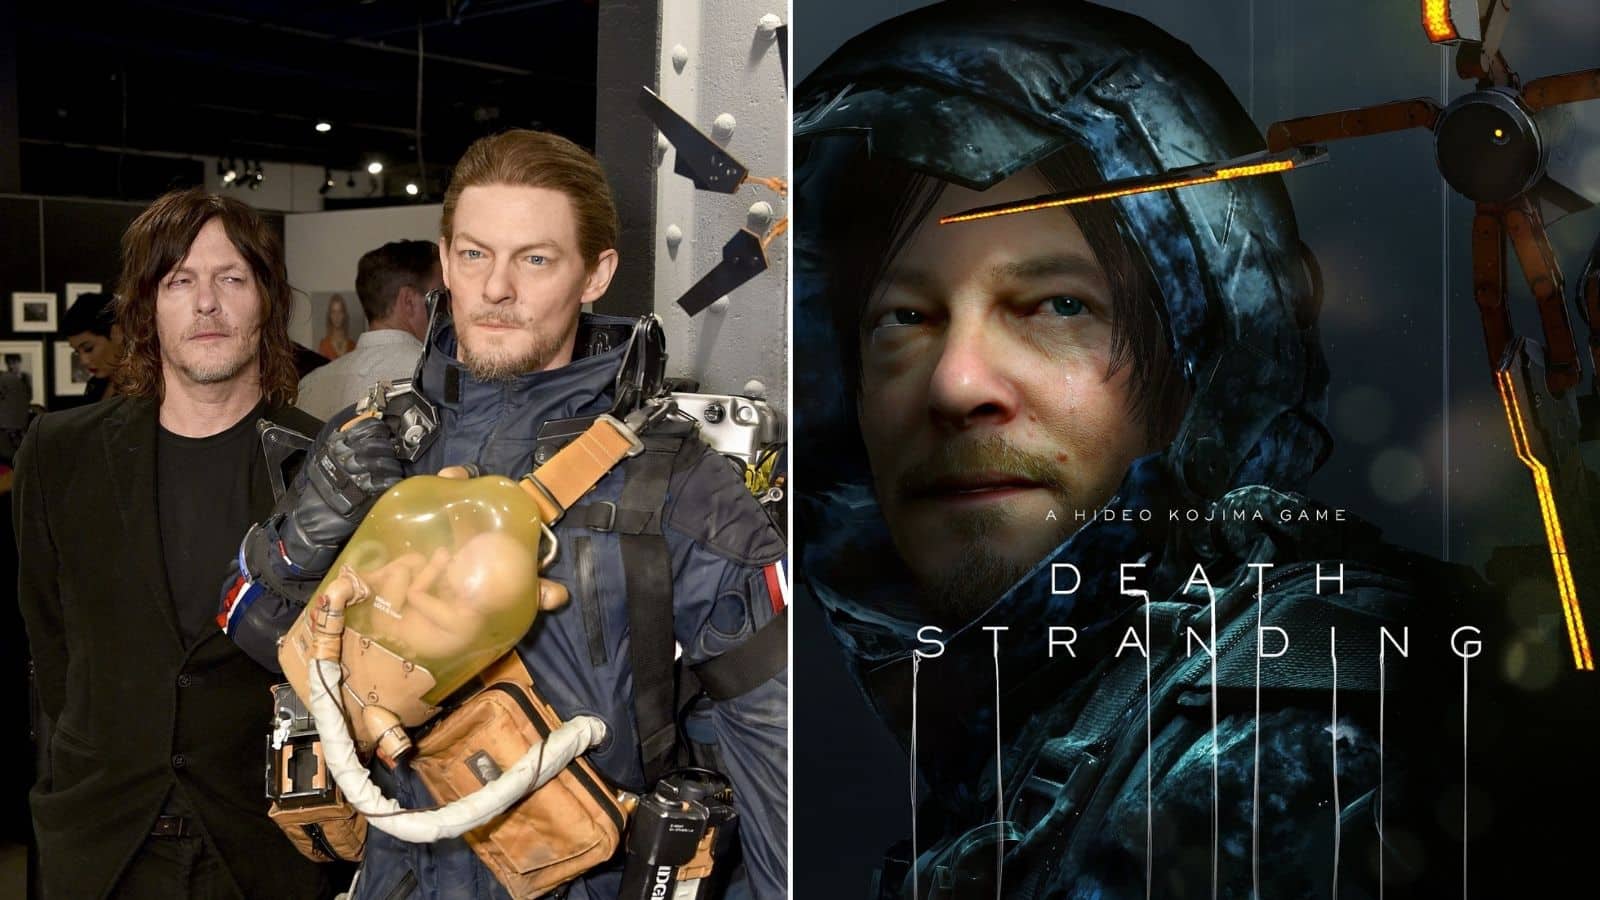 Sony PlayStation's booth at E3 this year featured a lifelike full-sized  statue of Norman Reedus in full costume to promote Hideo Kojima's highly  anticipated new game 'Death Stranding'. Two recent cast announcements